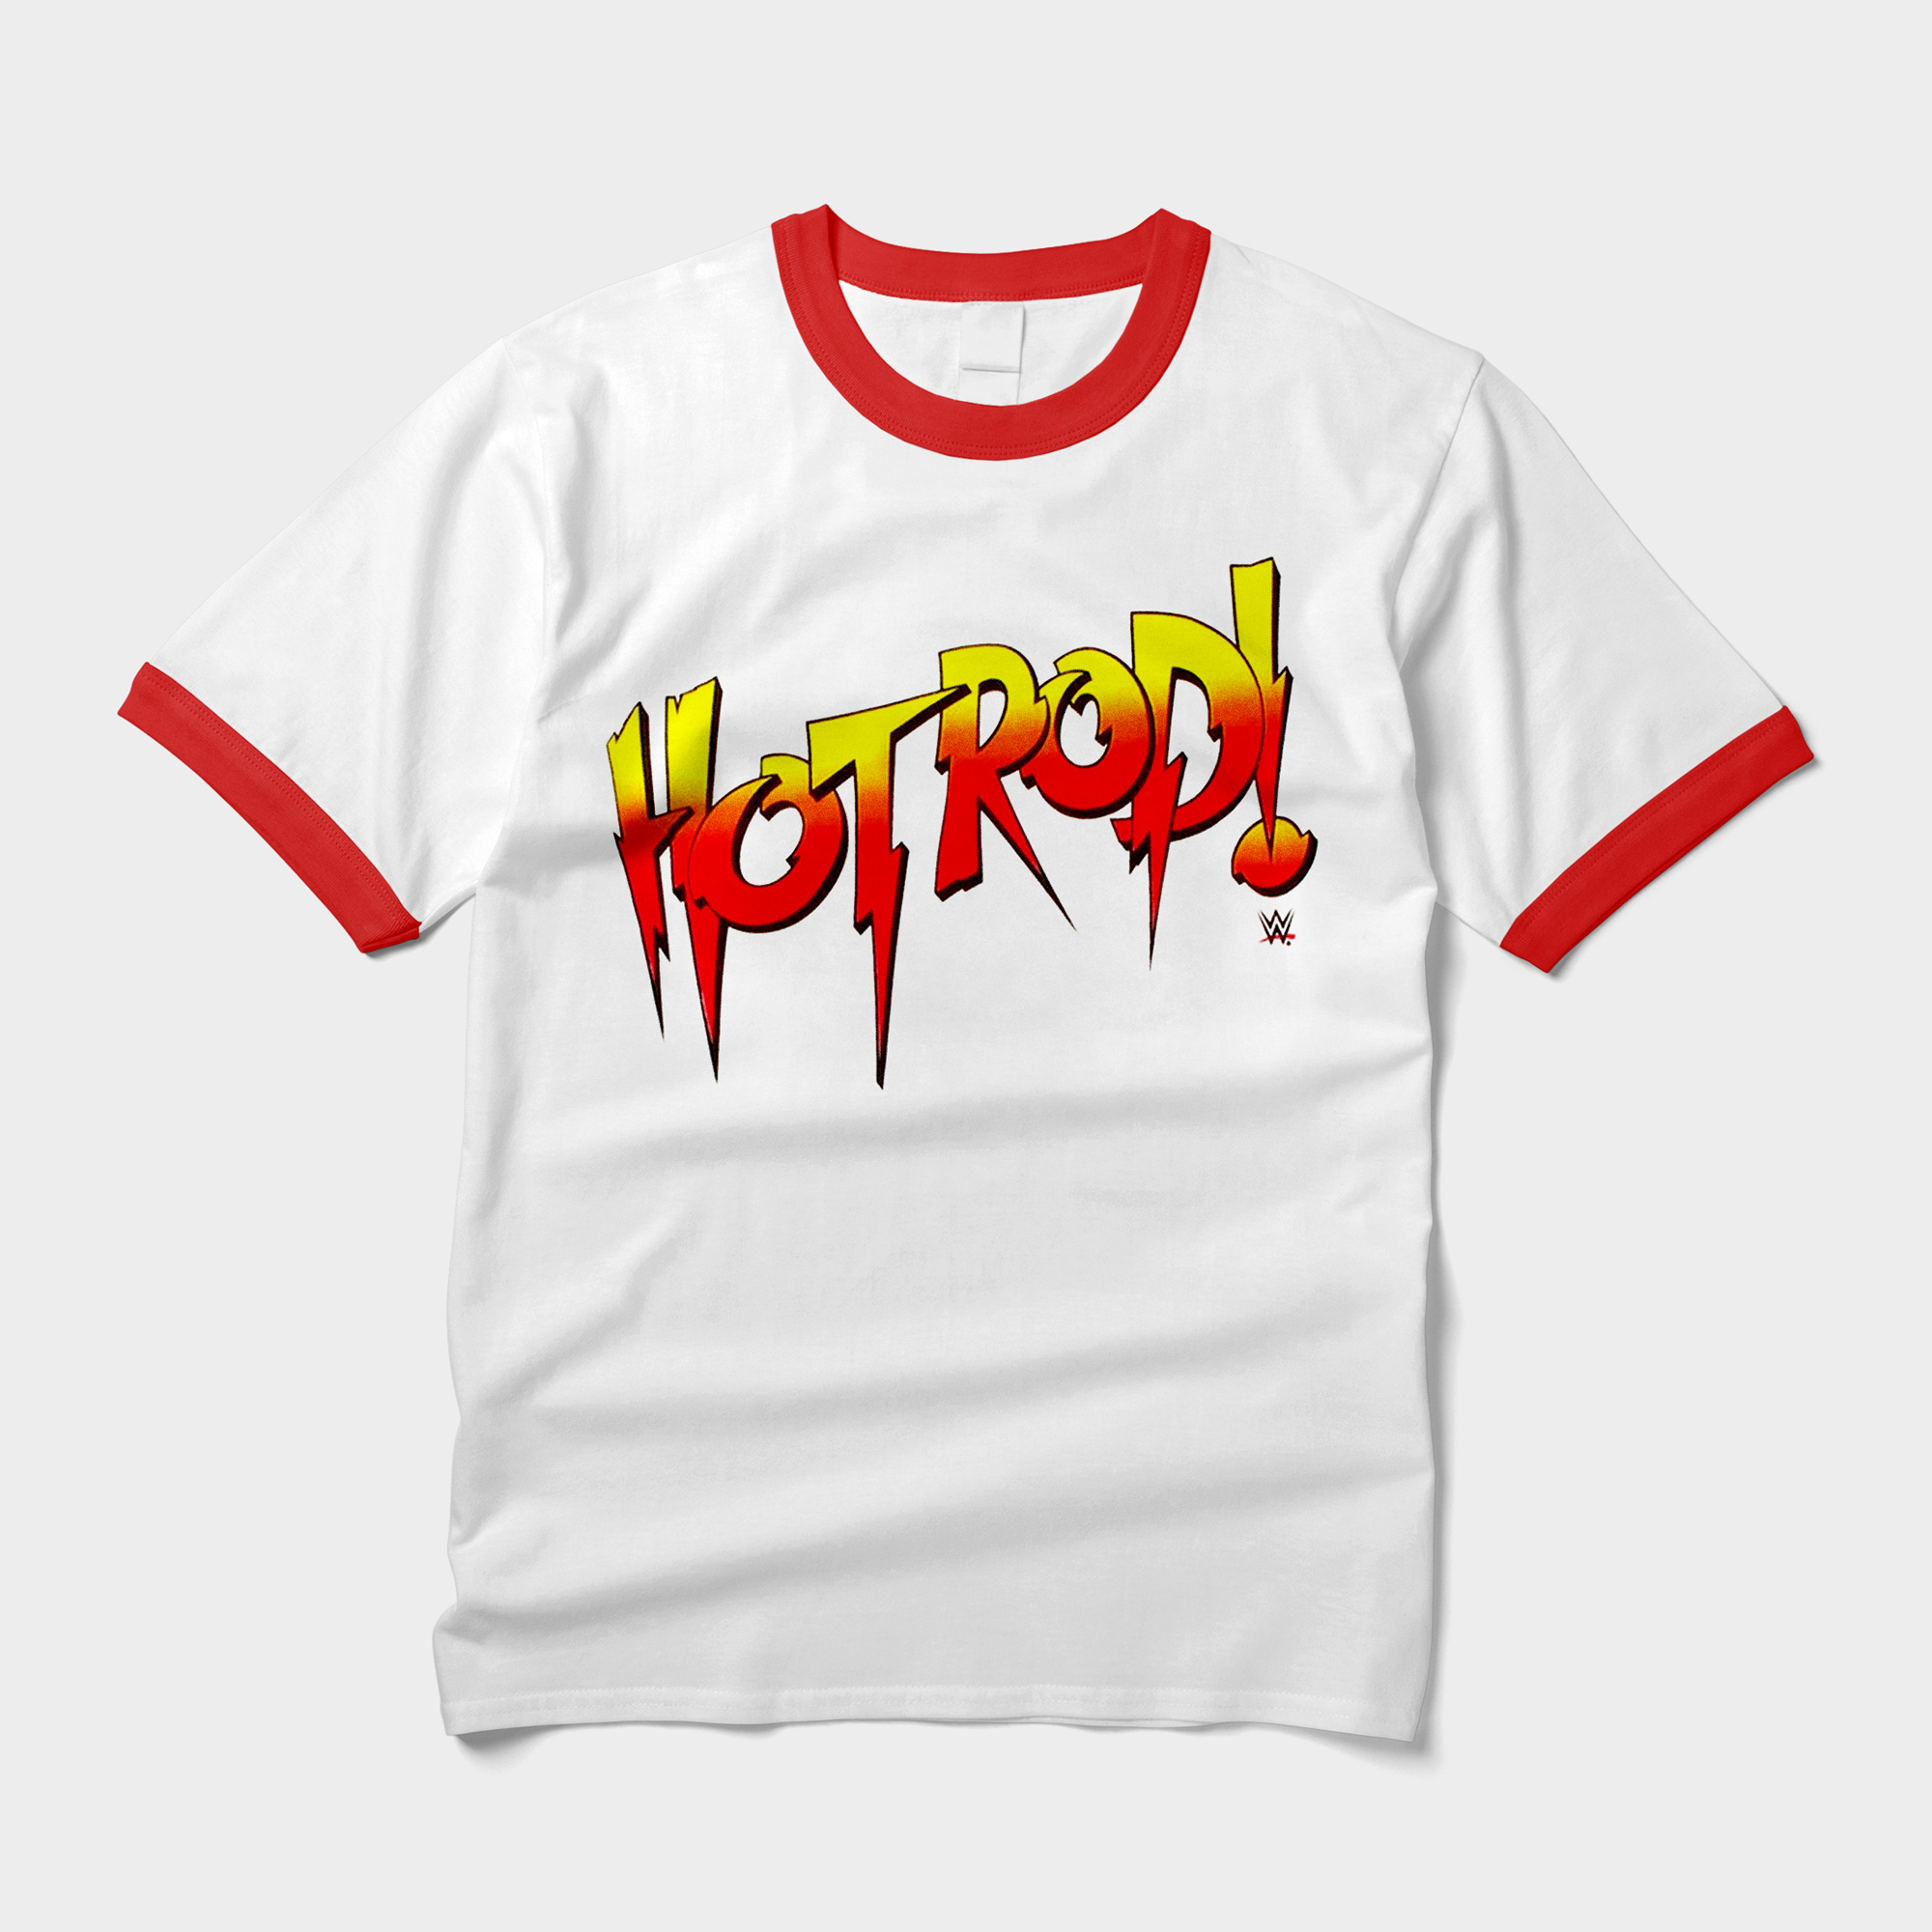 "Rowdy" Roddy Piper's signature "Hot Rod" t-shirt was voted most iconic! 